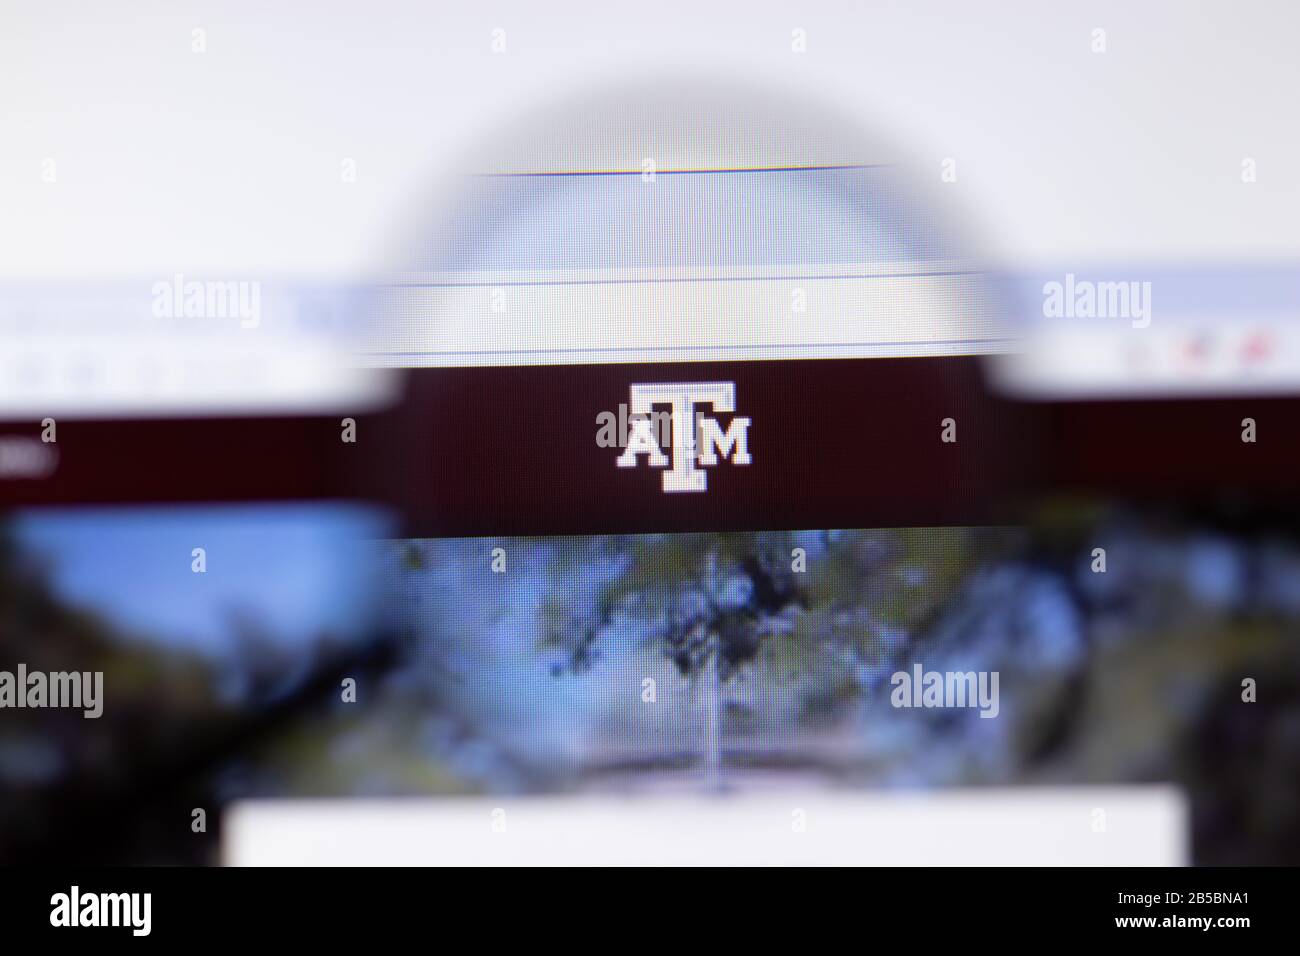 Los Angeles, California, USA - 7 March 2020: Texas A and M University website homepage logo visible on display close-up, Illustrative Editorial Stock Photo